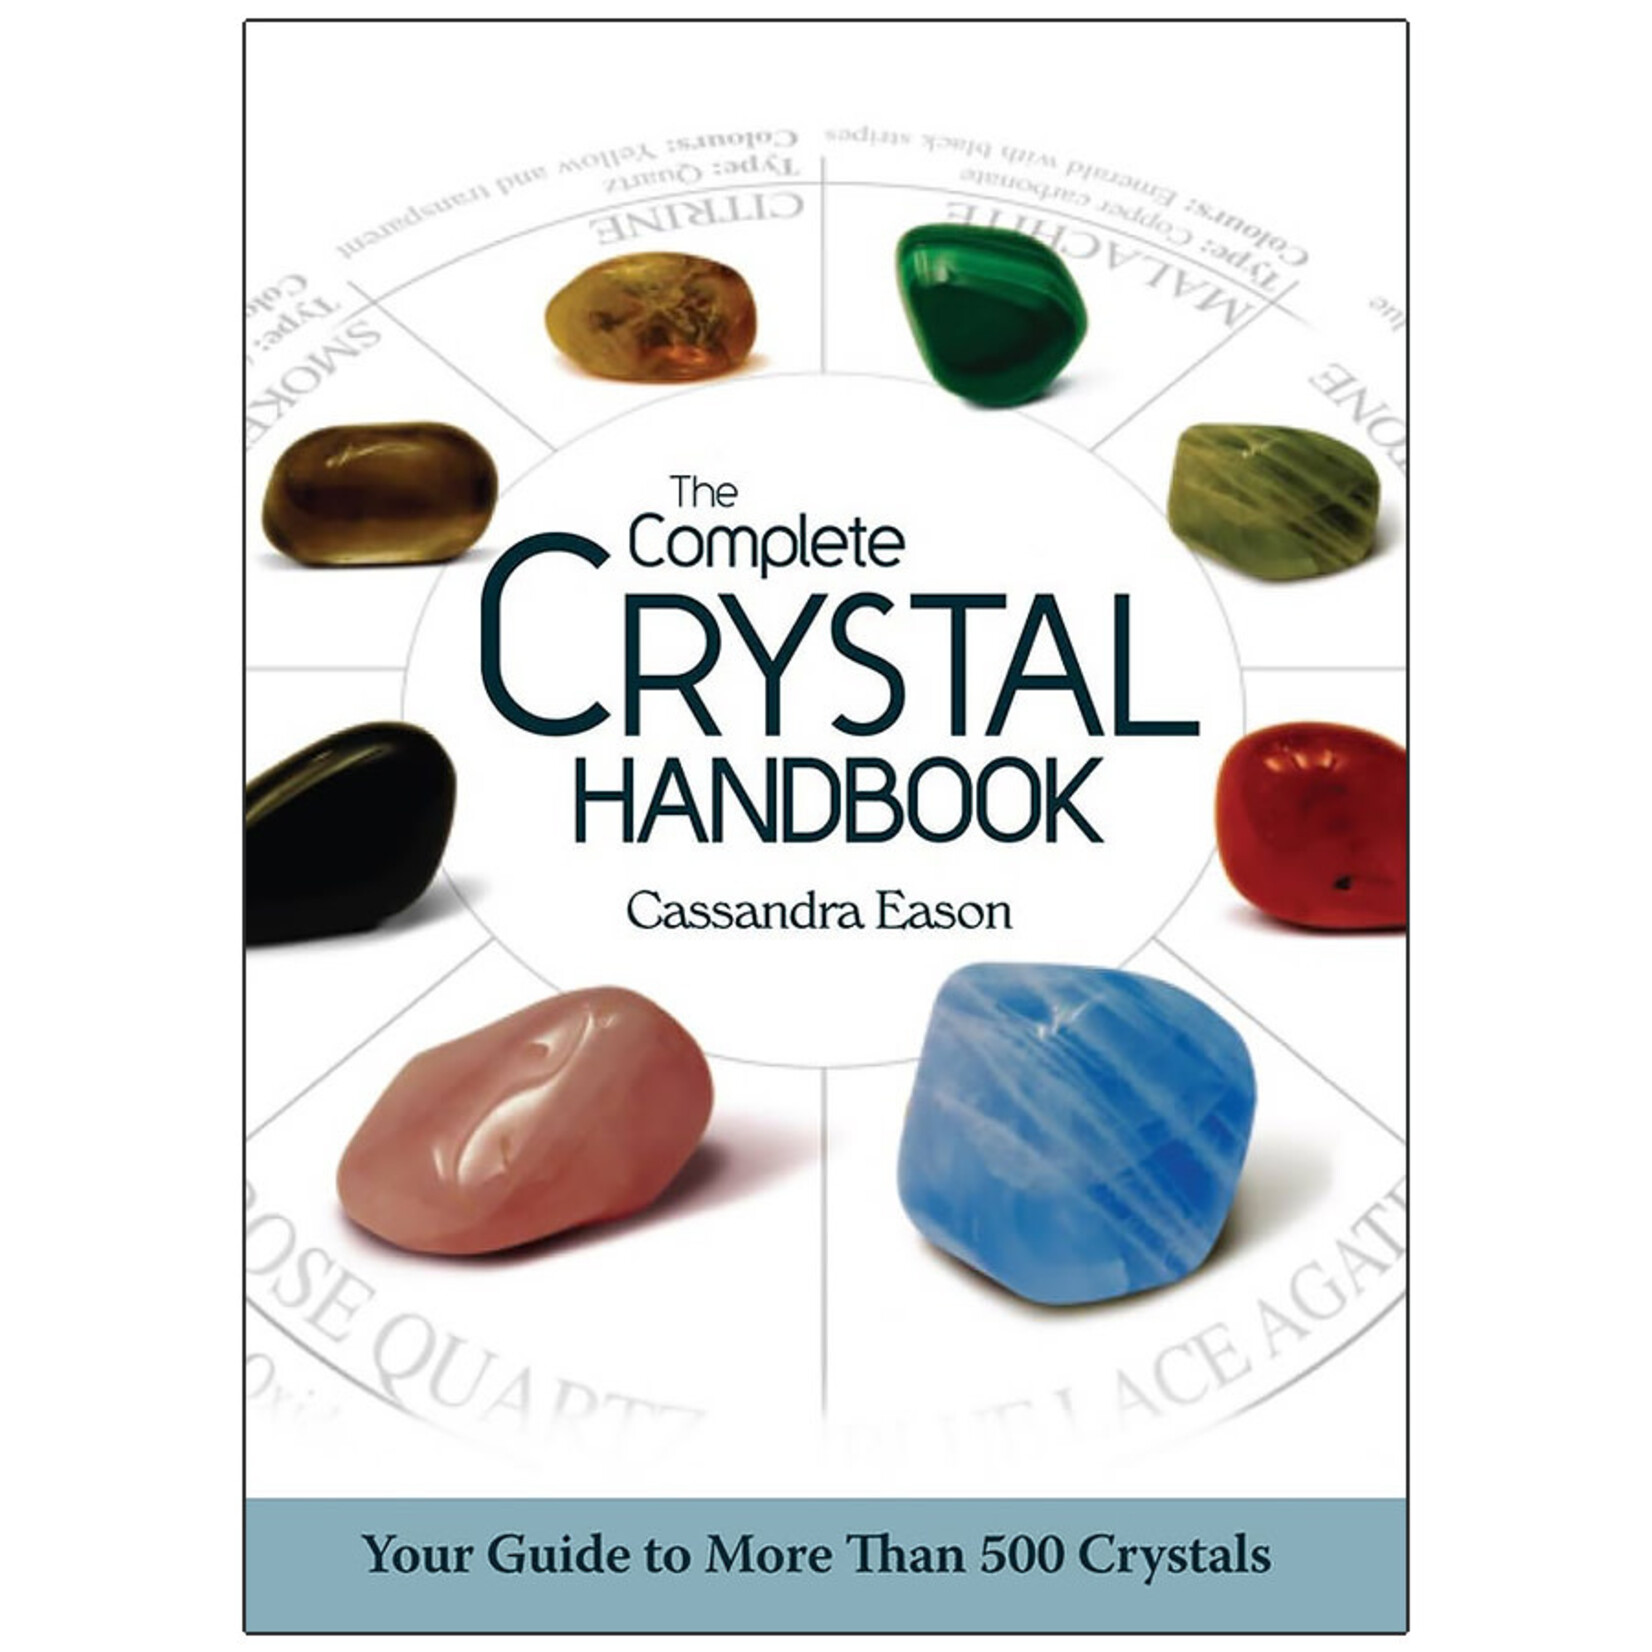 Union Square & Co. The Complete Crystal Handbook